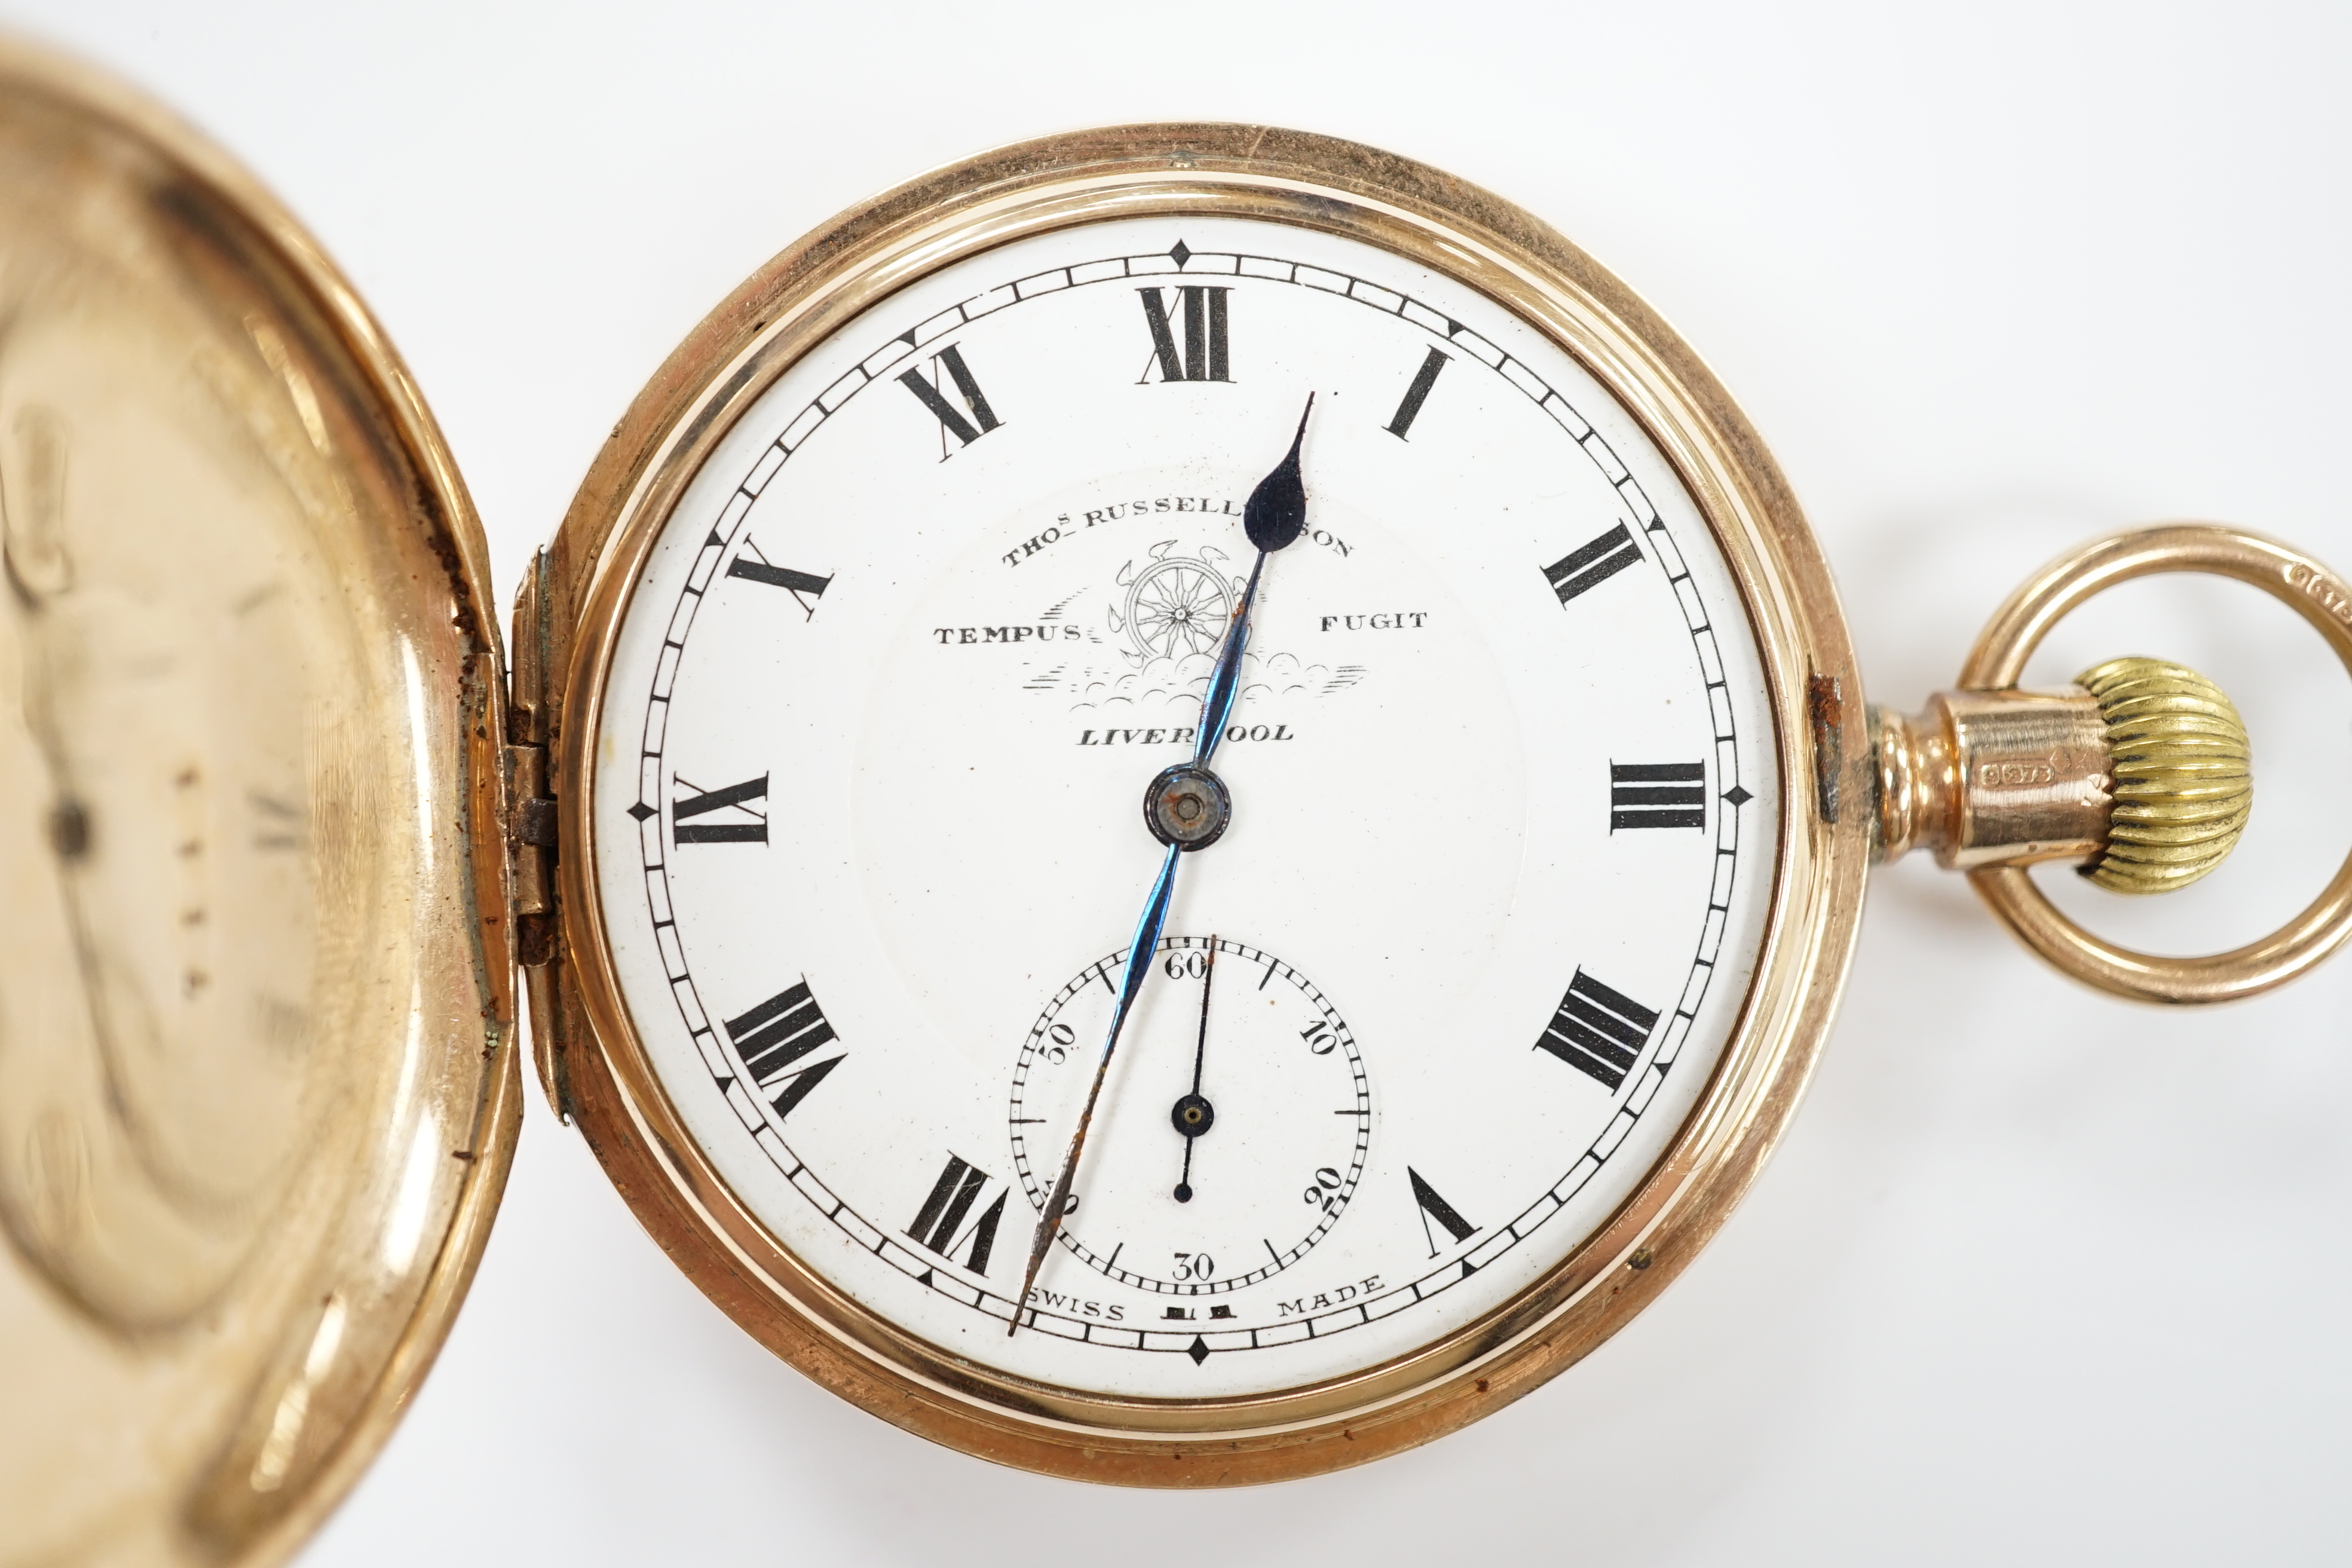 A George V 9ct gold keyless hunter pocket watch, by Thomas Russell & Sons Ltd of Liverpool, with Roman dial and subsidiary seconds (lacking glass), case diameter 50mm, gross weight 90 grams.